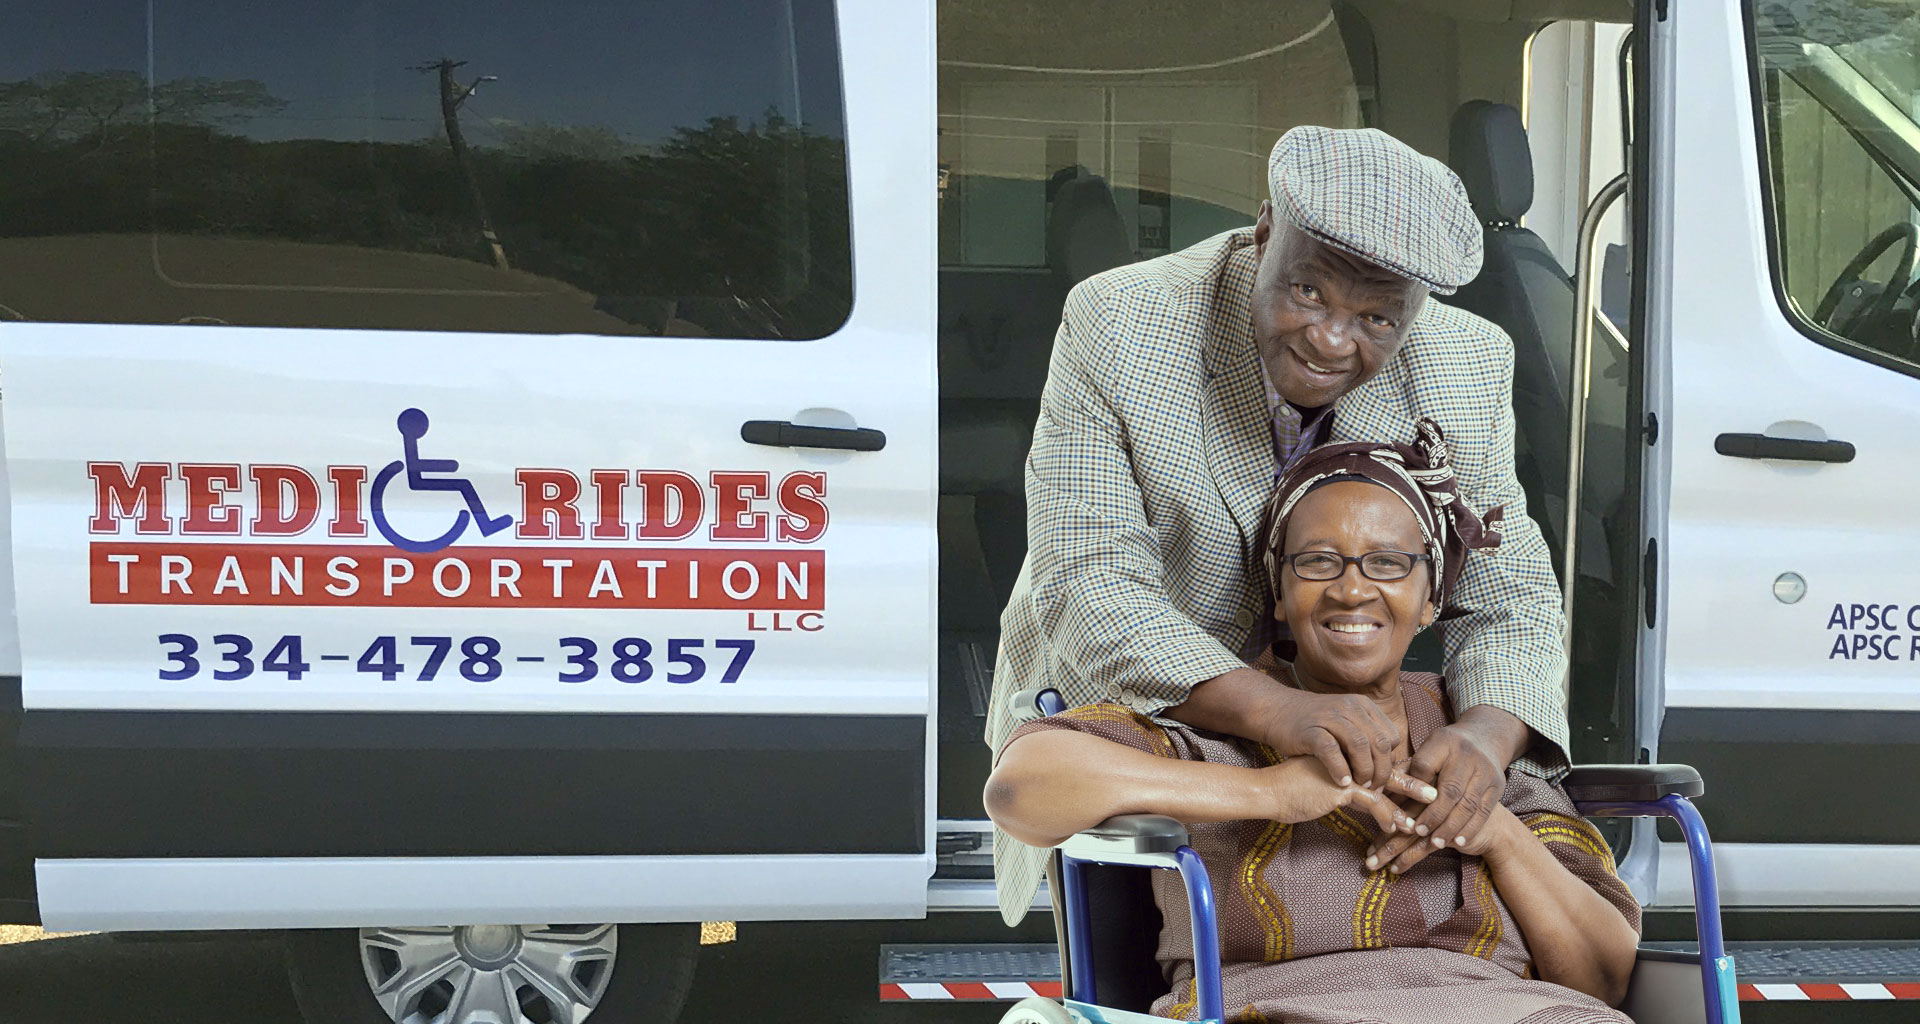 MediRides logo on a van and two people